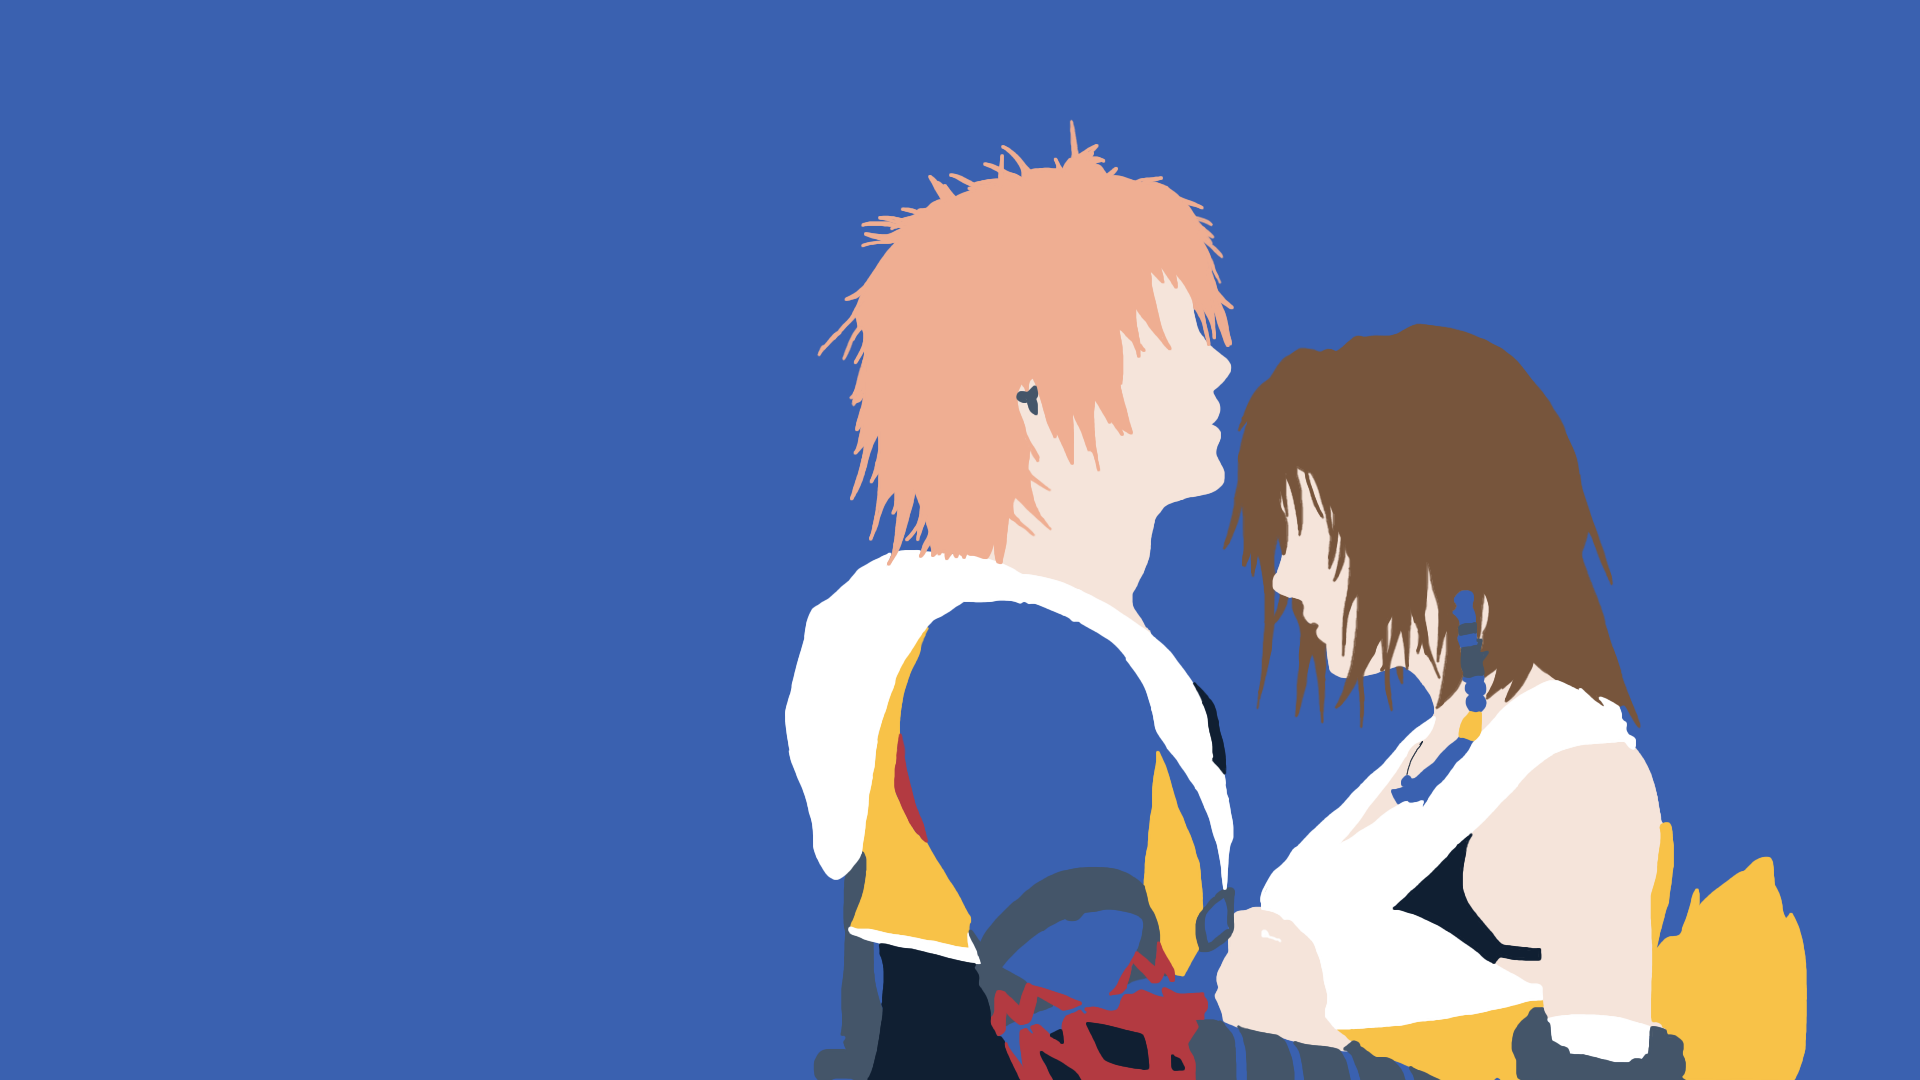 Ping Pong The Animation Minimalist Anime by Lucifer012 on DeviantArt